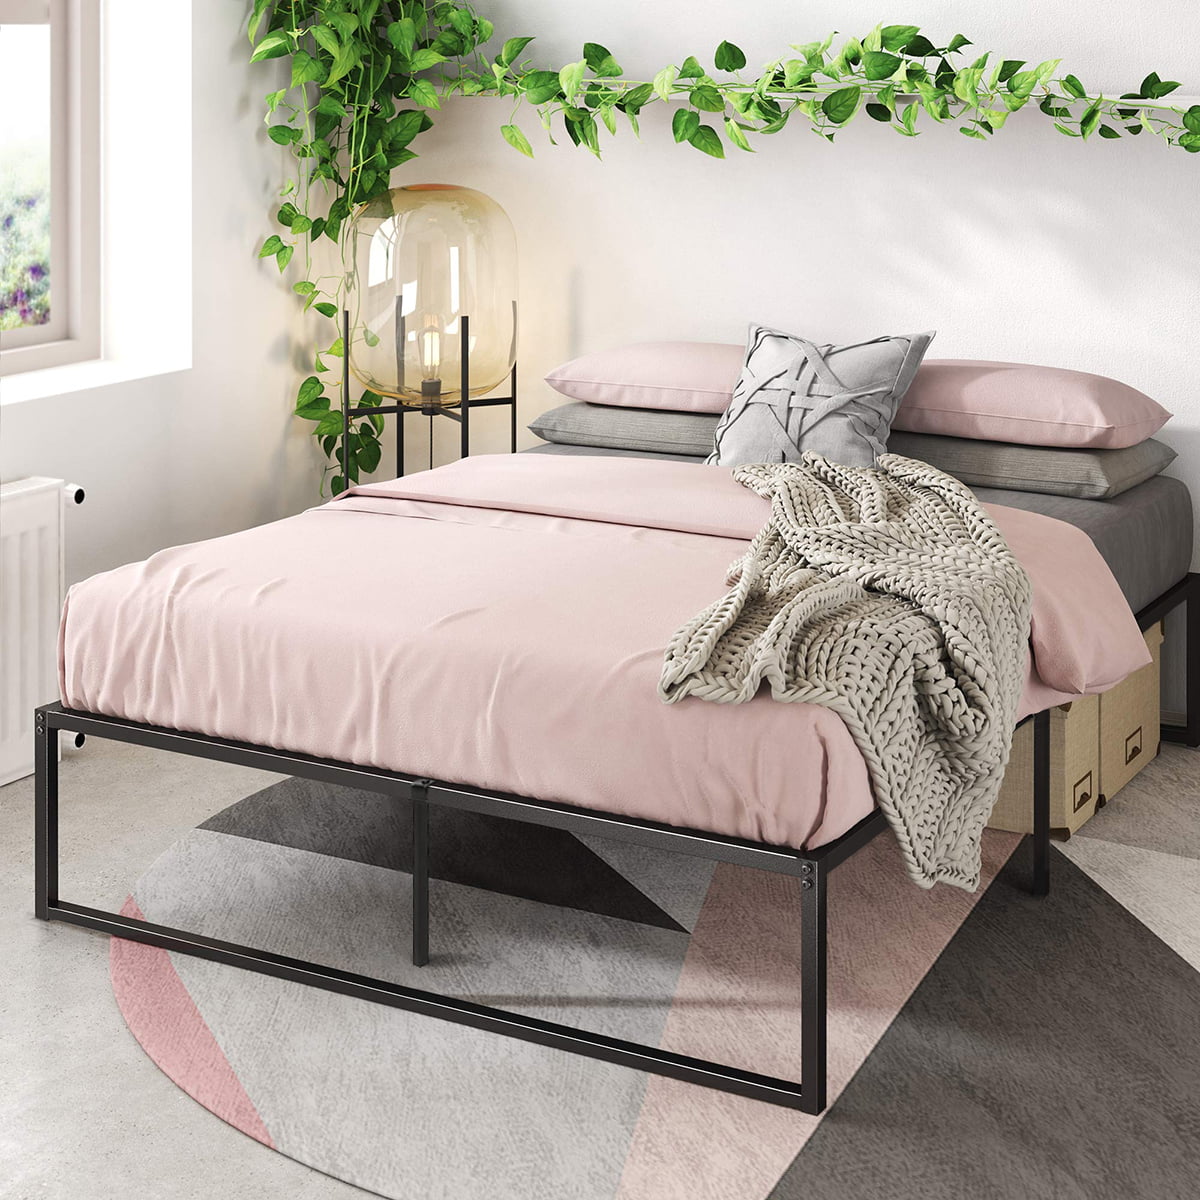 14/16.5"  Platform Bed Frame, Twin/Full/Queen/King Size High Weight ...